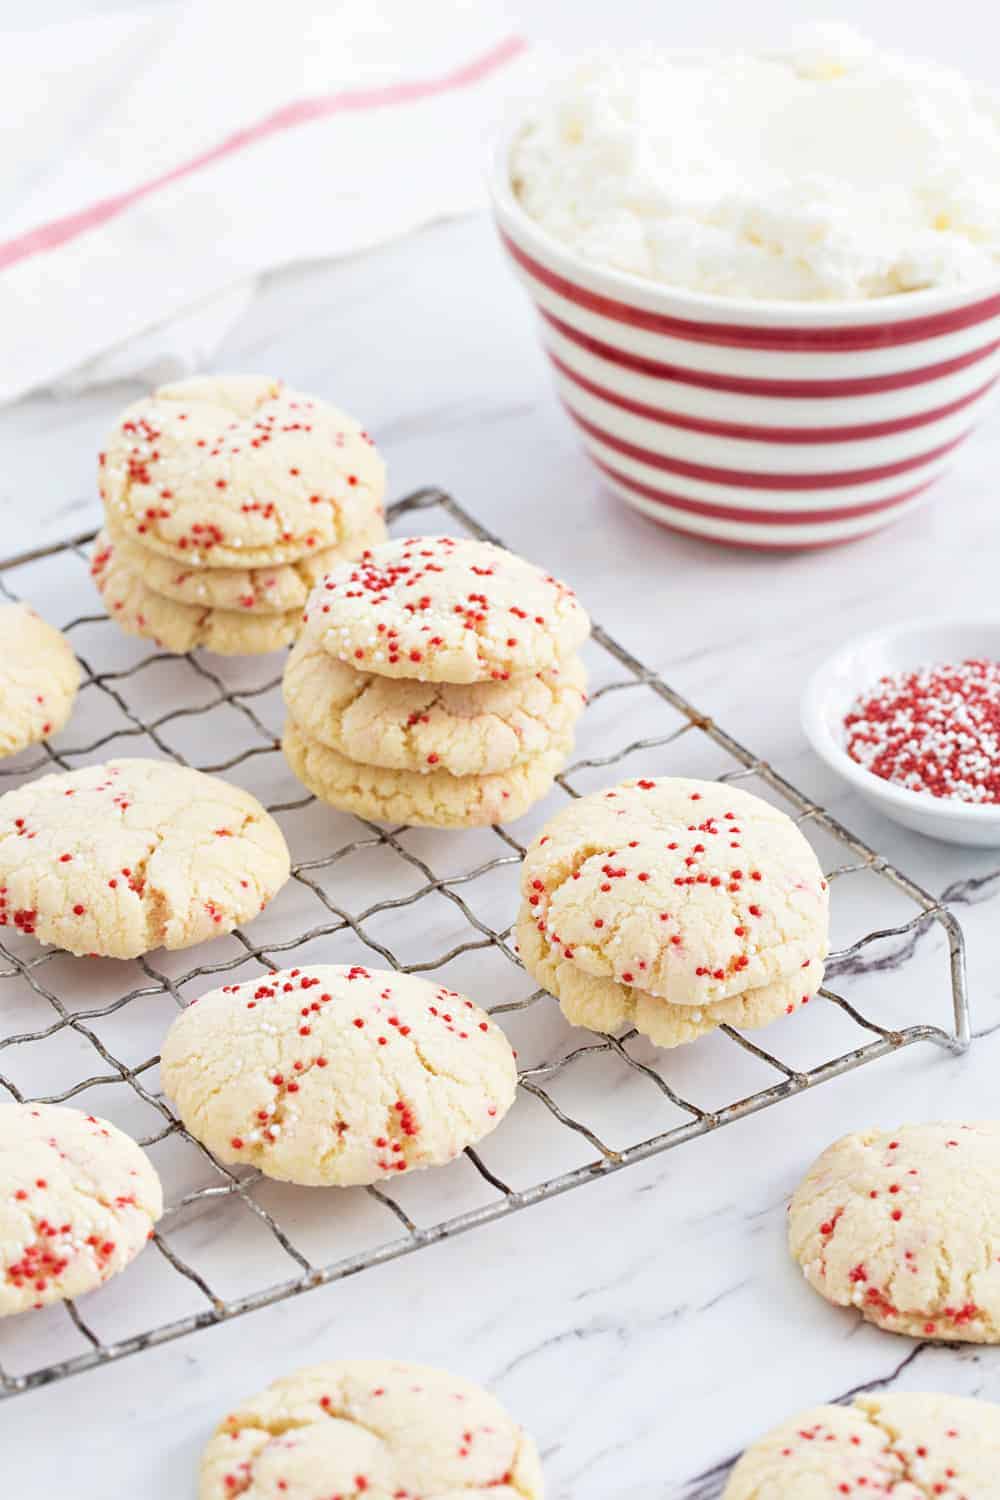 Easy Sugar Cookies come together in a snap! No chilling, rolling, or cookie cutters required! So easy and delish!